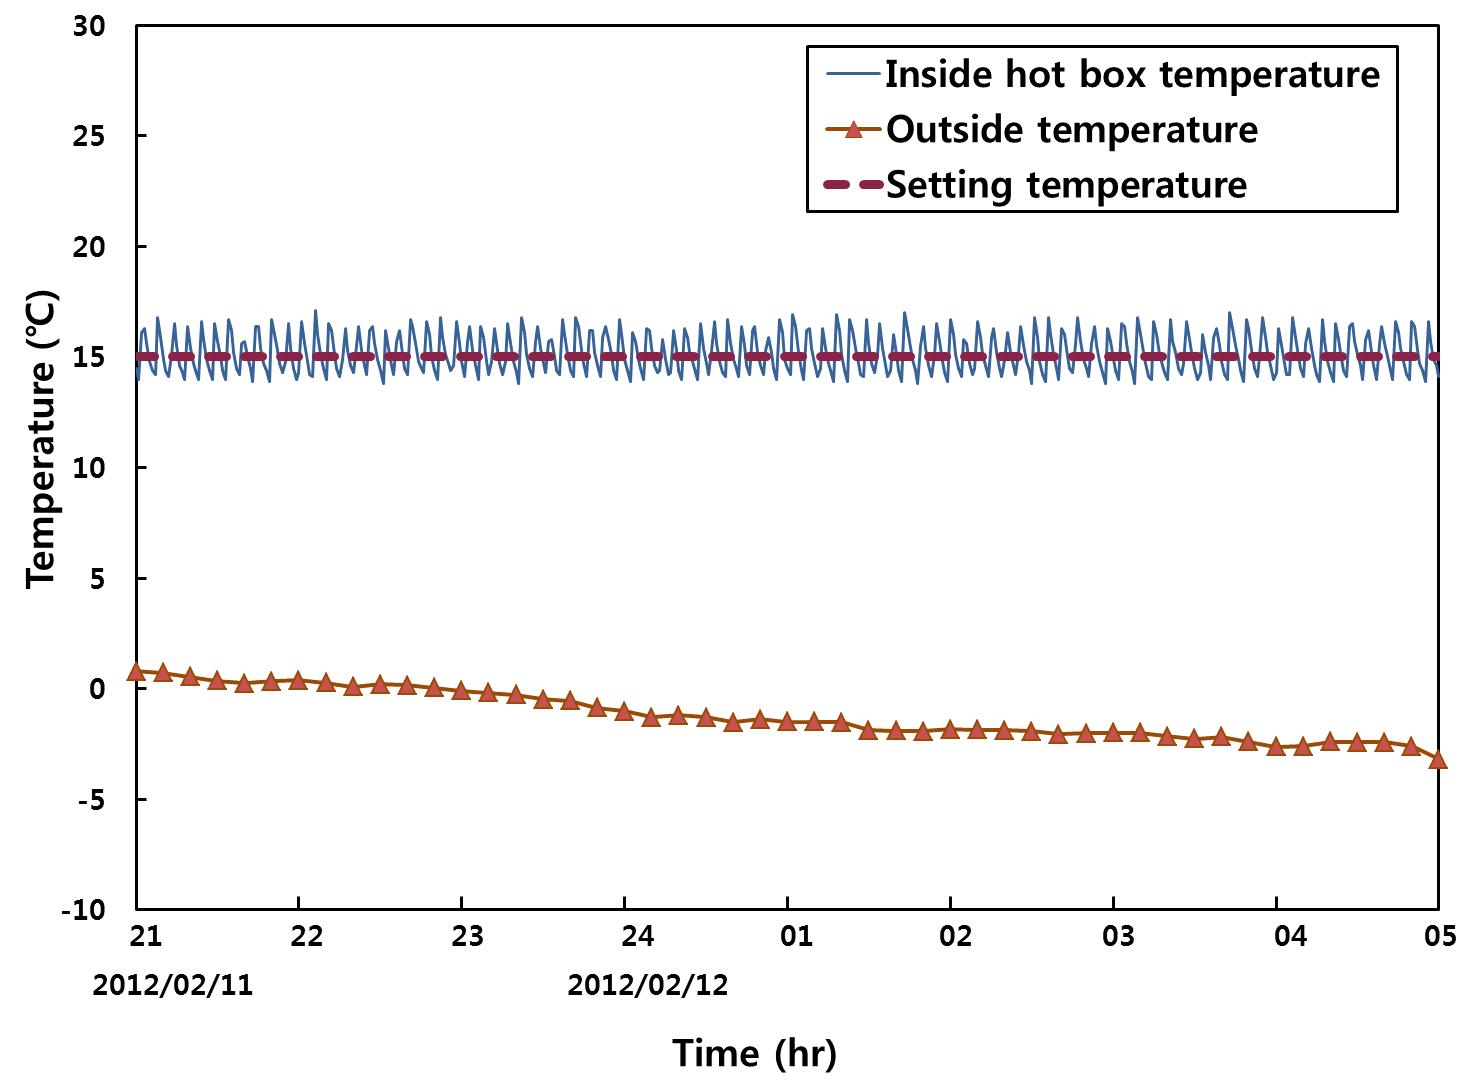 Variation of inside hot box temperature and outside temperature